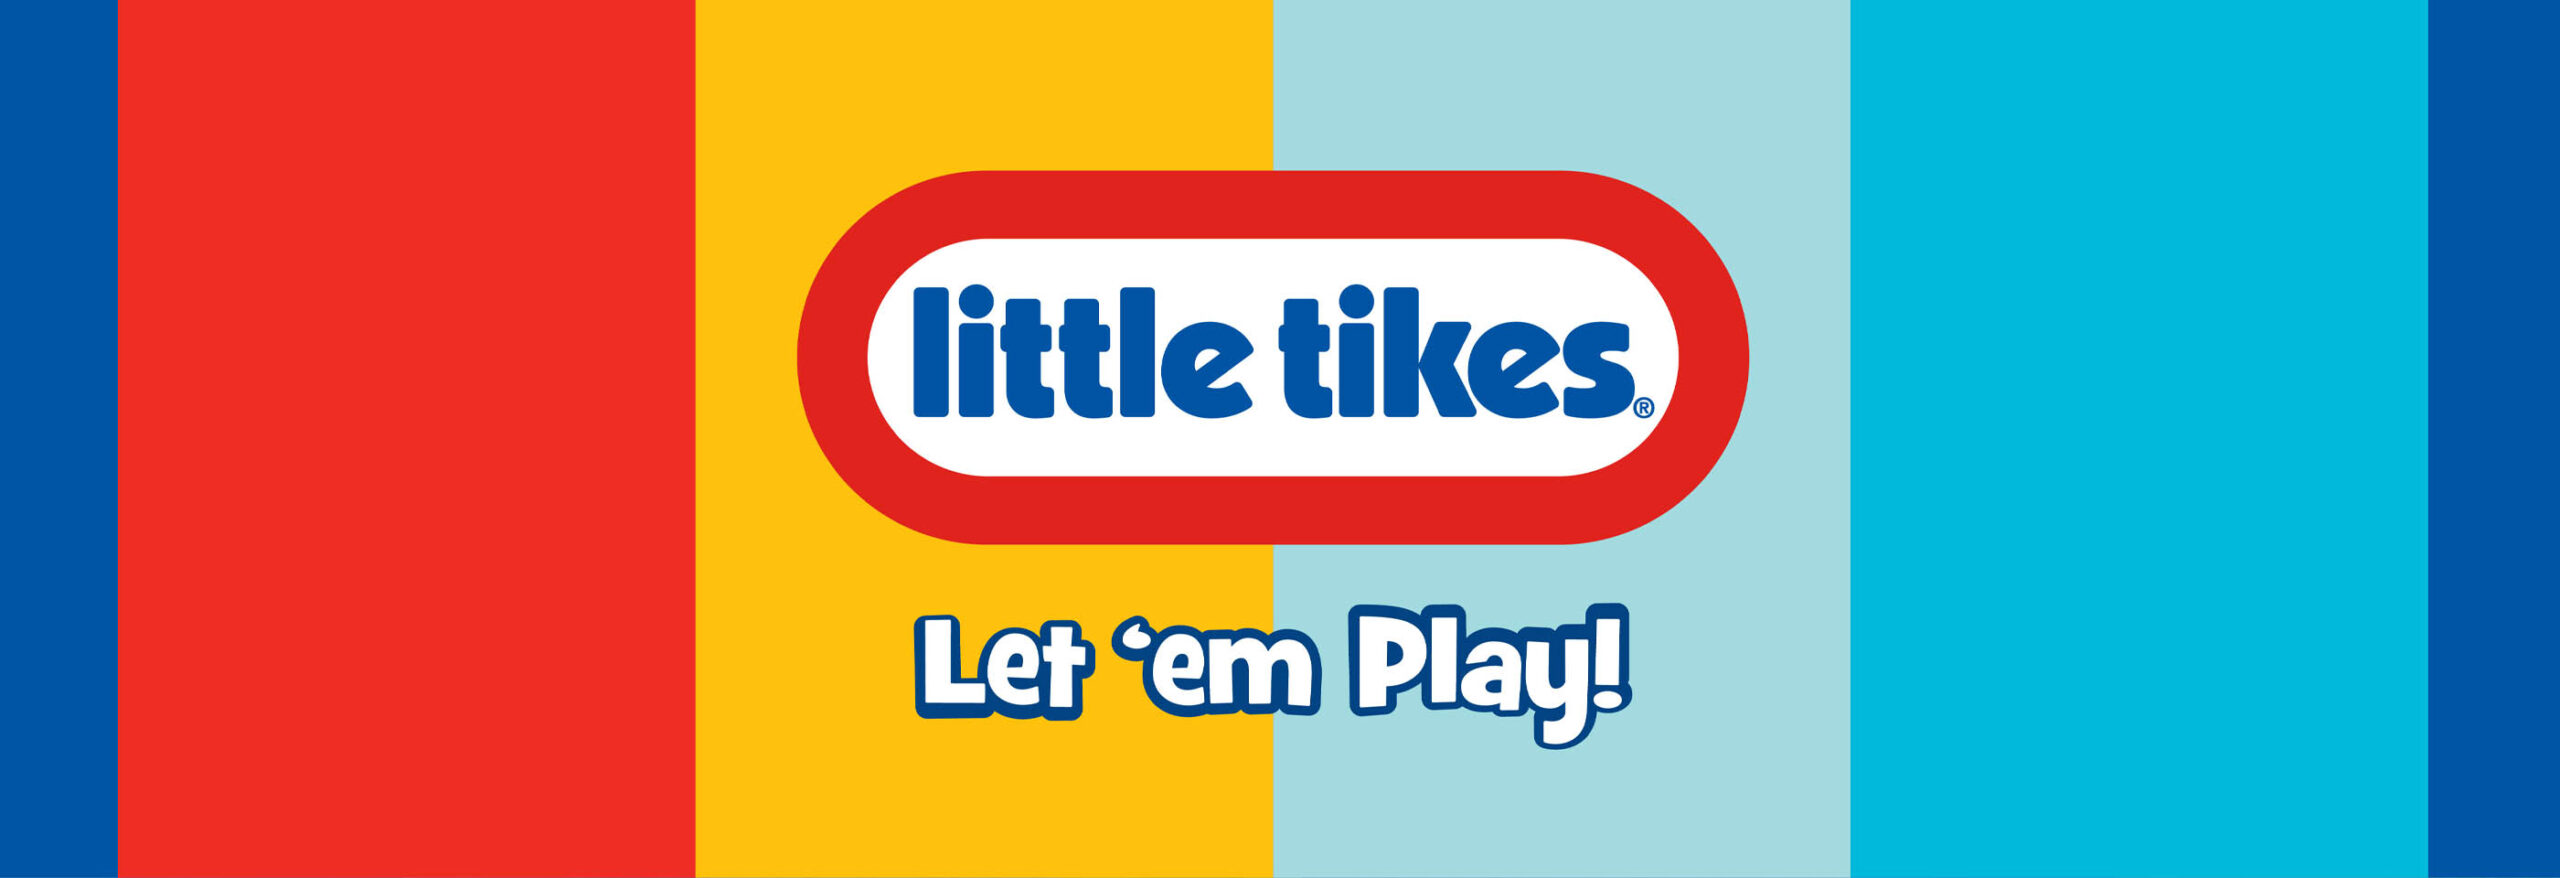 Be in to WIN with Little Tikes!